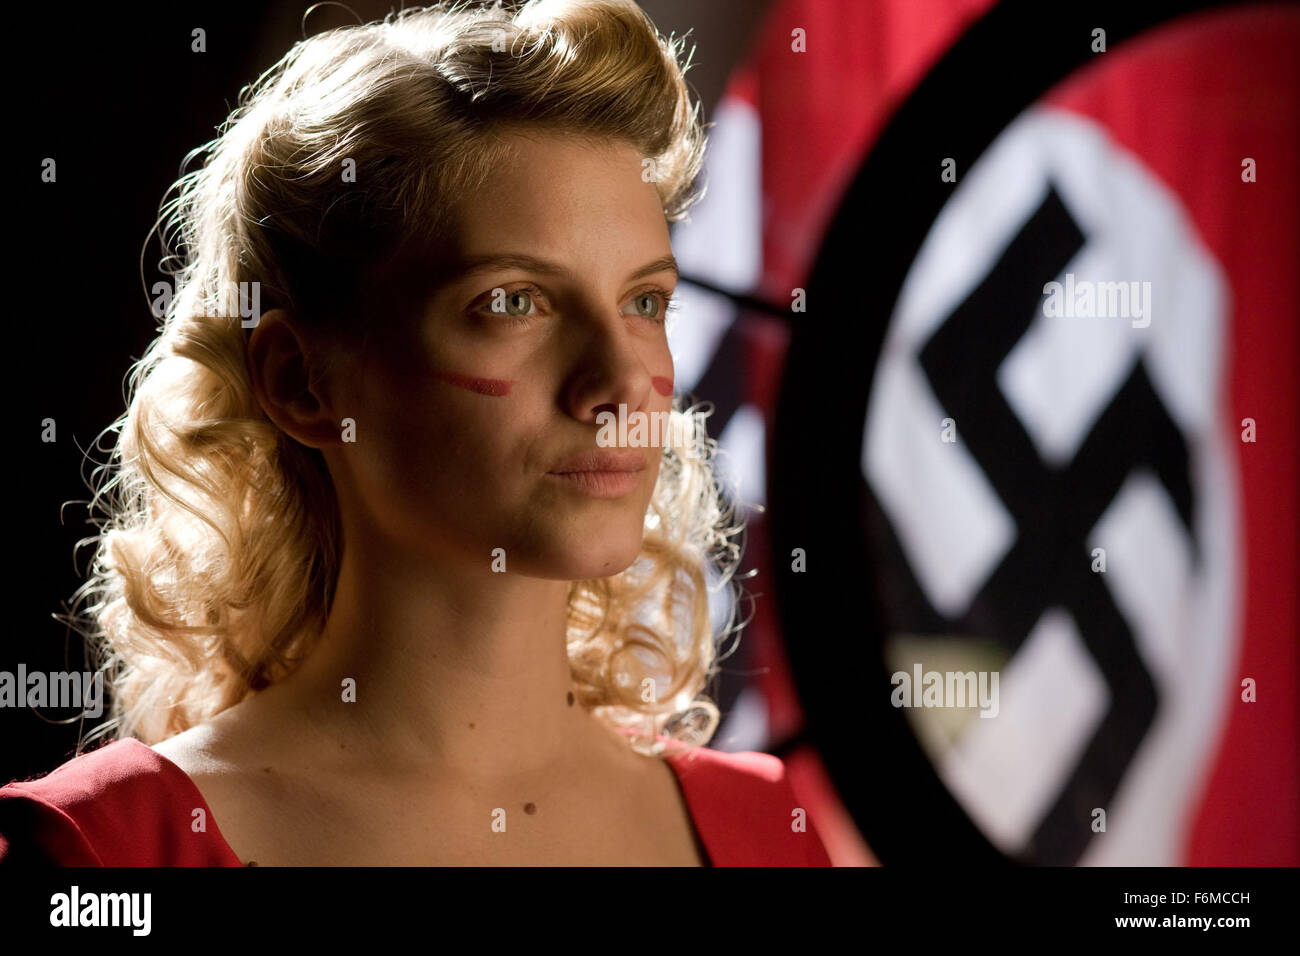 RELEASE DATE: August 21, 2009. MOVIE TITLE: Inglourious Basterds. STUDIO: Universal Pictures. PLOT: In Nazi occupied France, young Jewish refugee Shosanna Dreyfus witnesses the slaughter of her family by Colonel Hans Landa. Narrowly escaping with her life, she plots her revenge several years later when German war hero Fredrick Zoller takes a rapid interest in her and arranges an illustrious movie premiere at the theater she now runs. With the promise of every major Nazi officer in attendance, the event catches the attention of theBasterds, a group of Jewish-American guerilla soldiers led by Stock Photo